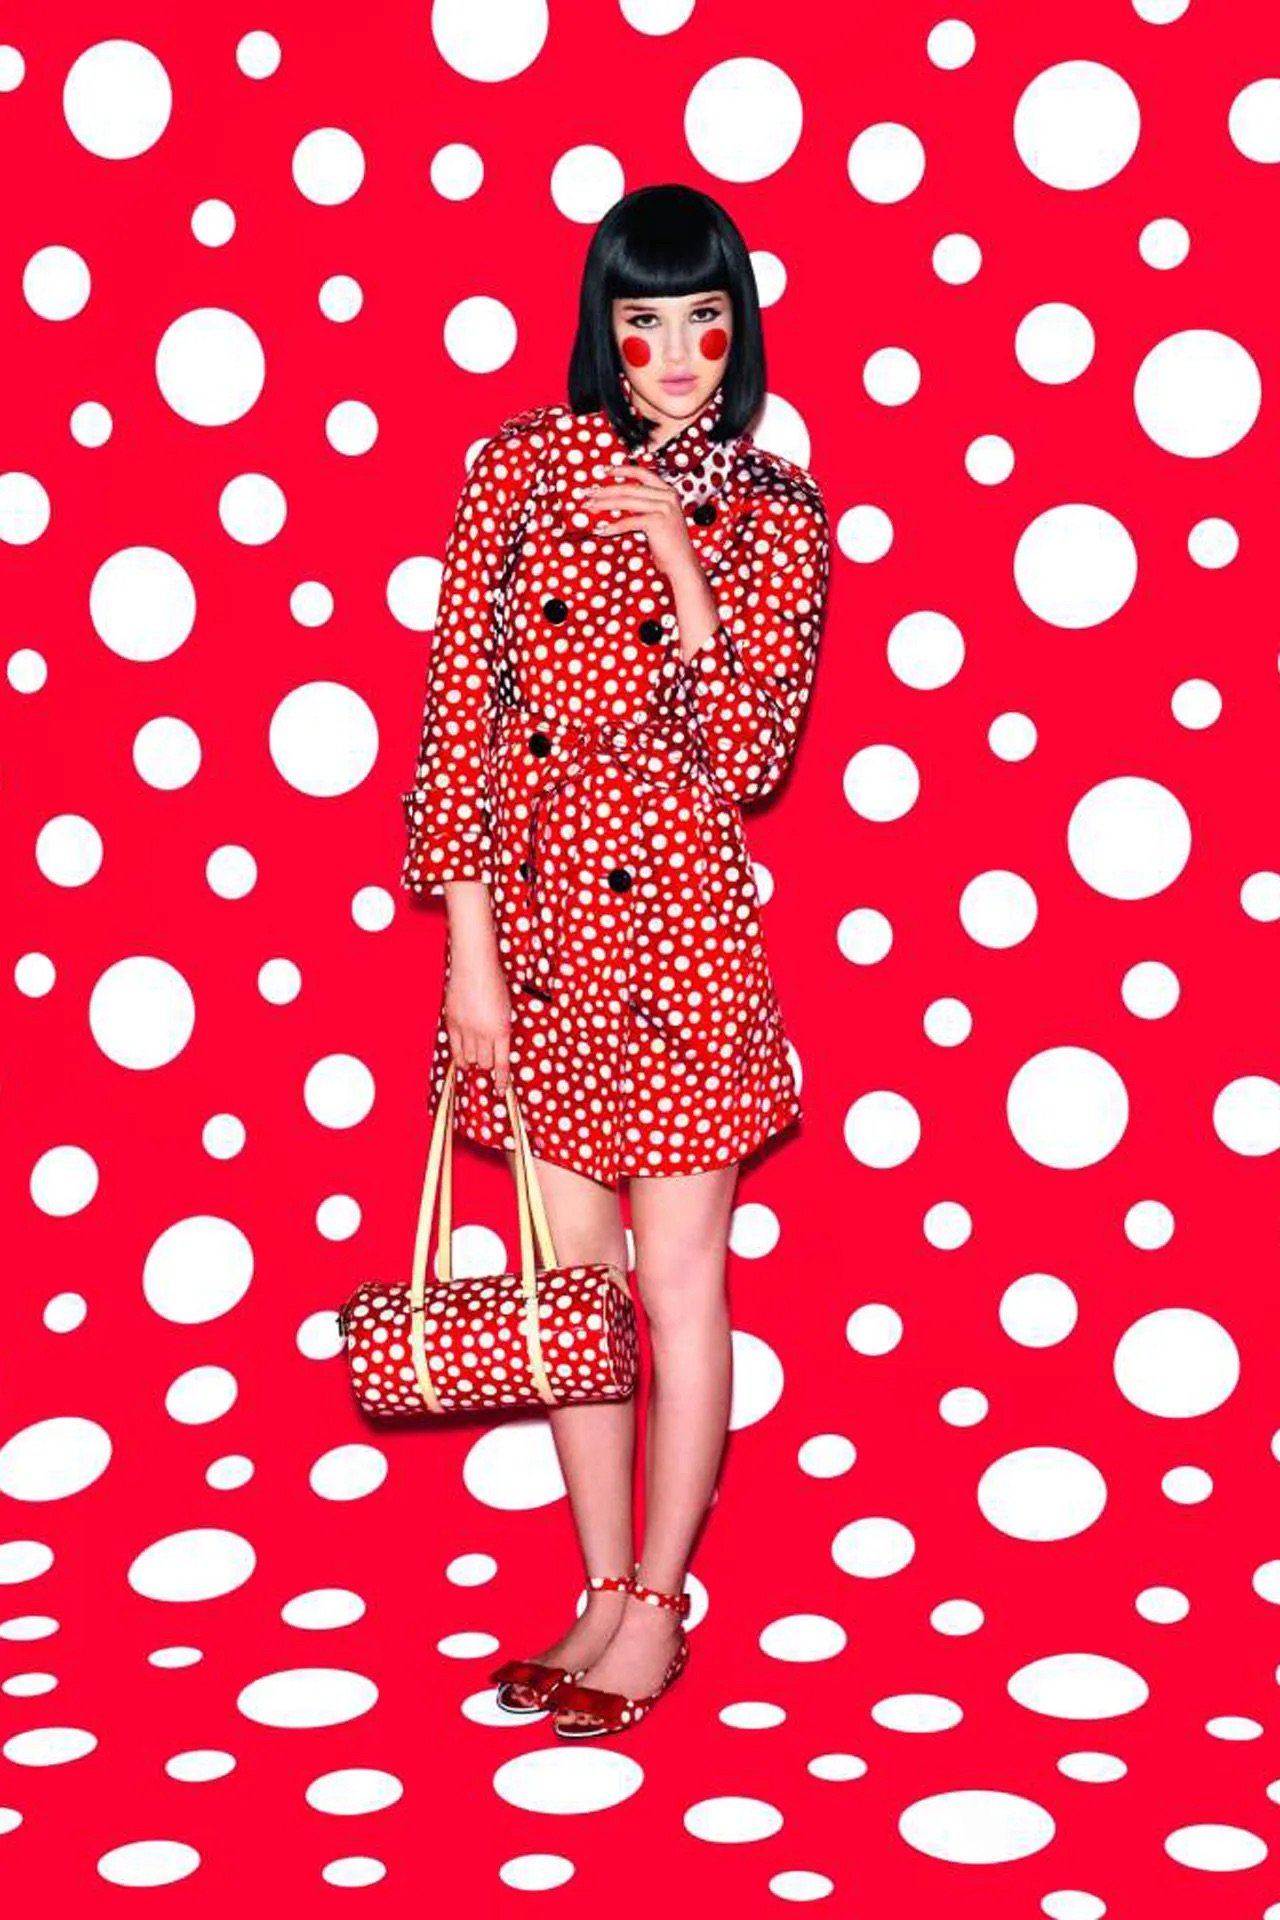 Louis Vuitton x Yayoi Kusama Collab Debuts in Vogue Netherlands January 2023  by Koto Bolofo — Anne of Carversville